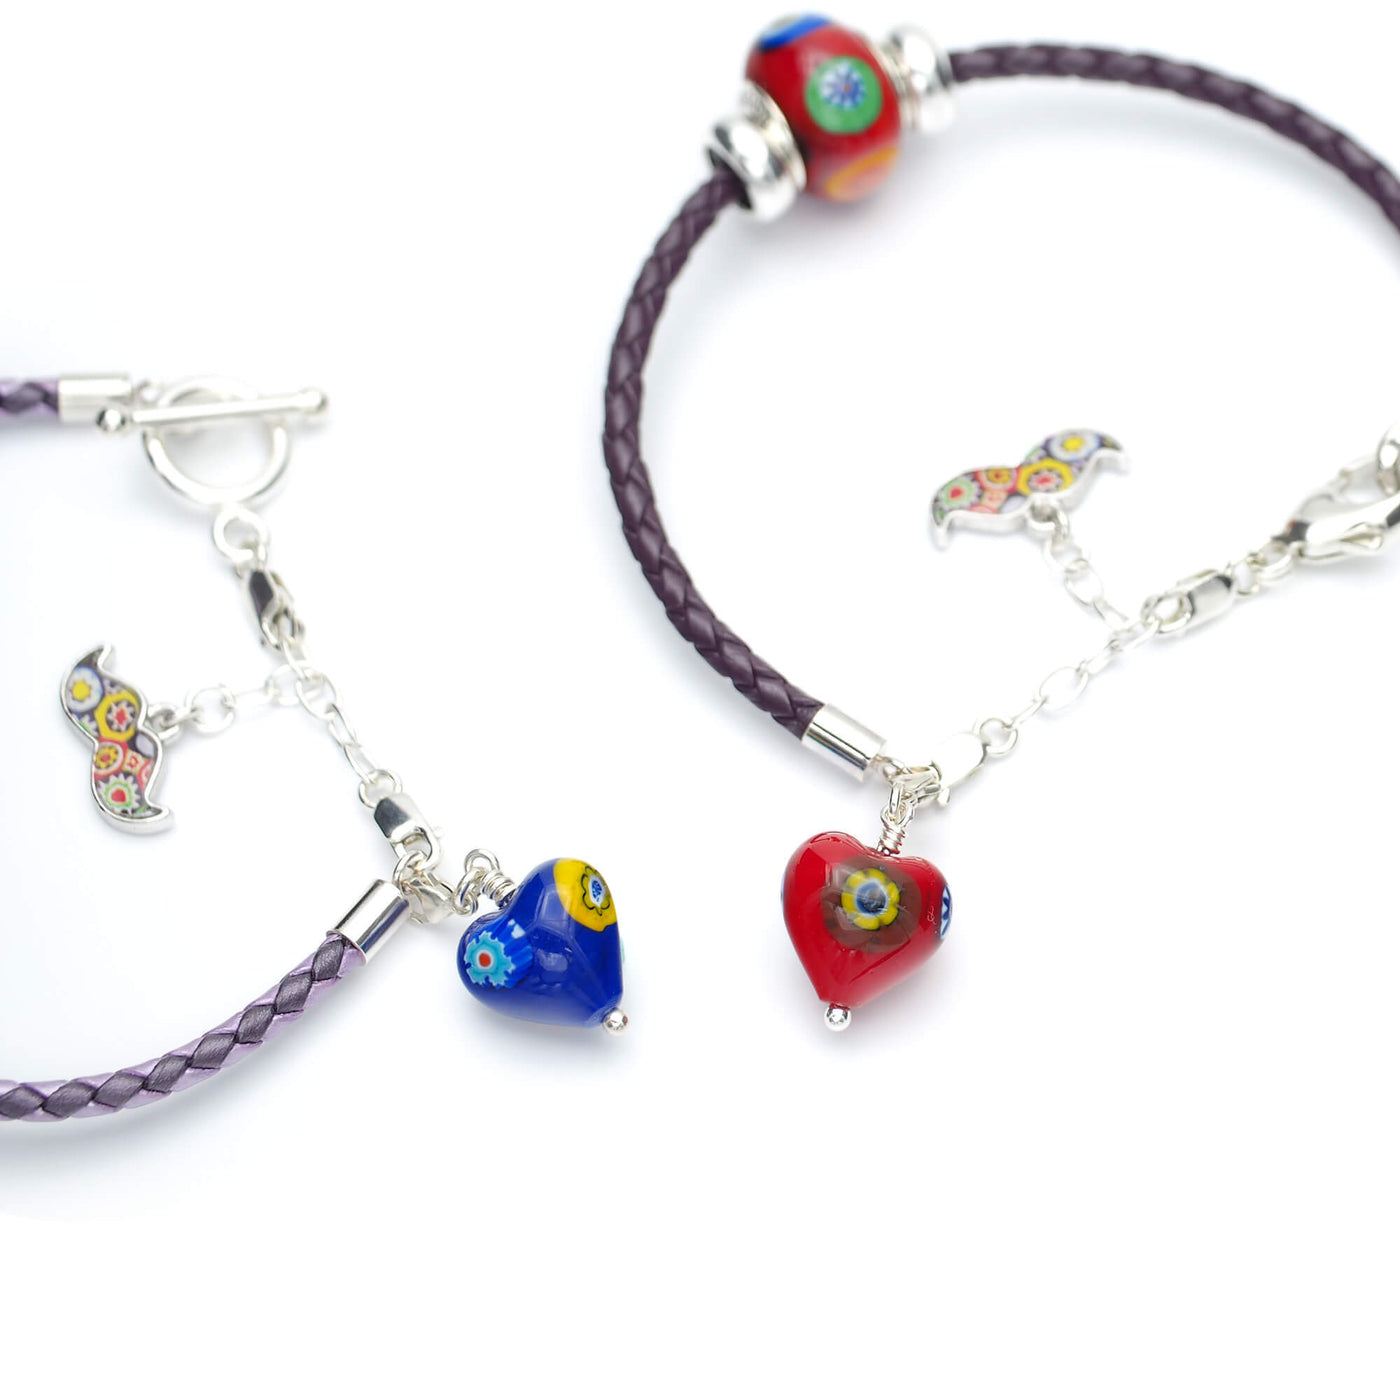 Charms for Bracelet - Small Red Heart - Charms